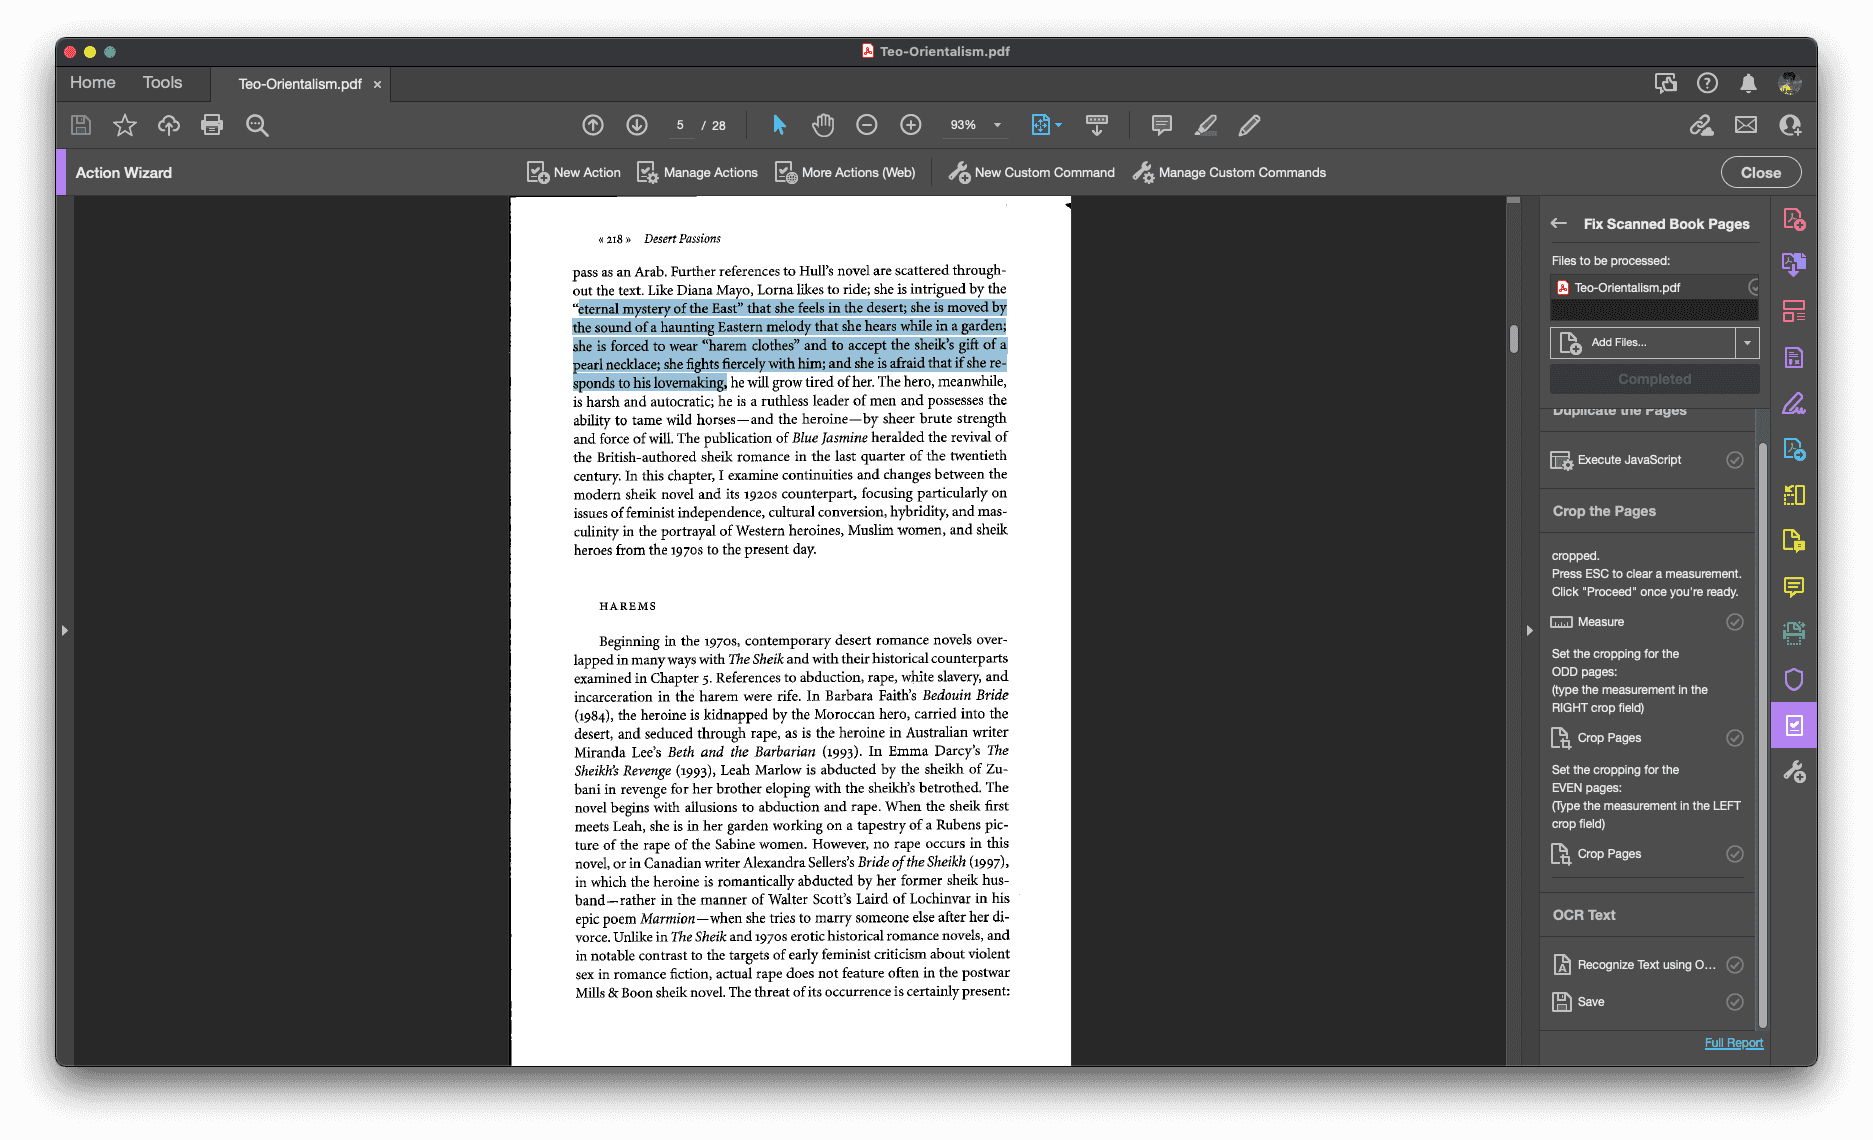 A screenshot of the Adobe Acrobat interface. It is in dark mode, so the windows are a dark grey and there is a single page of text in the center